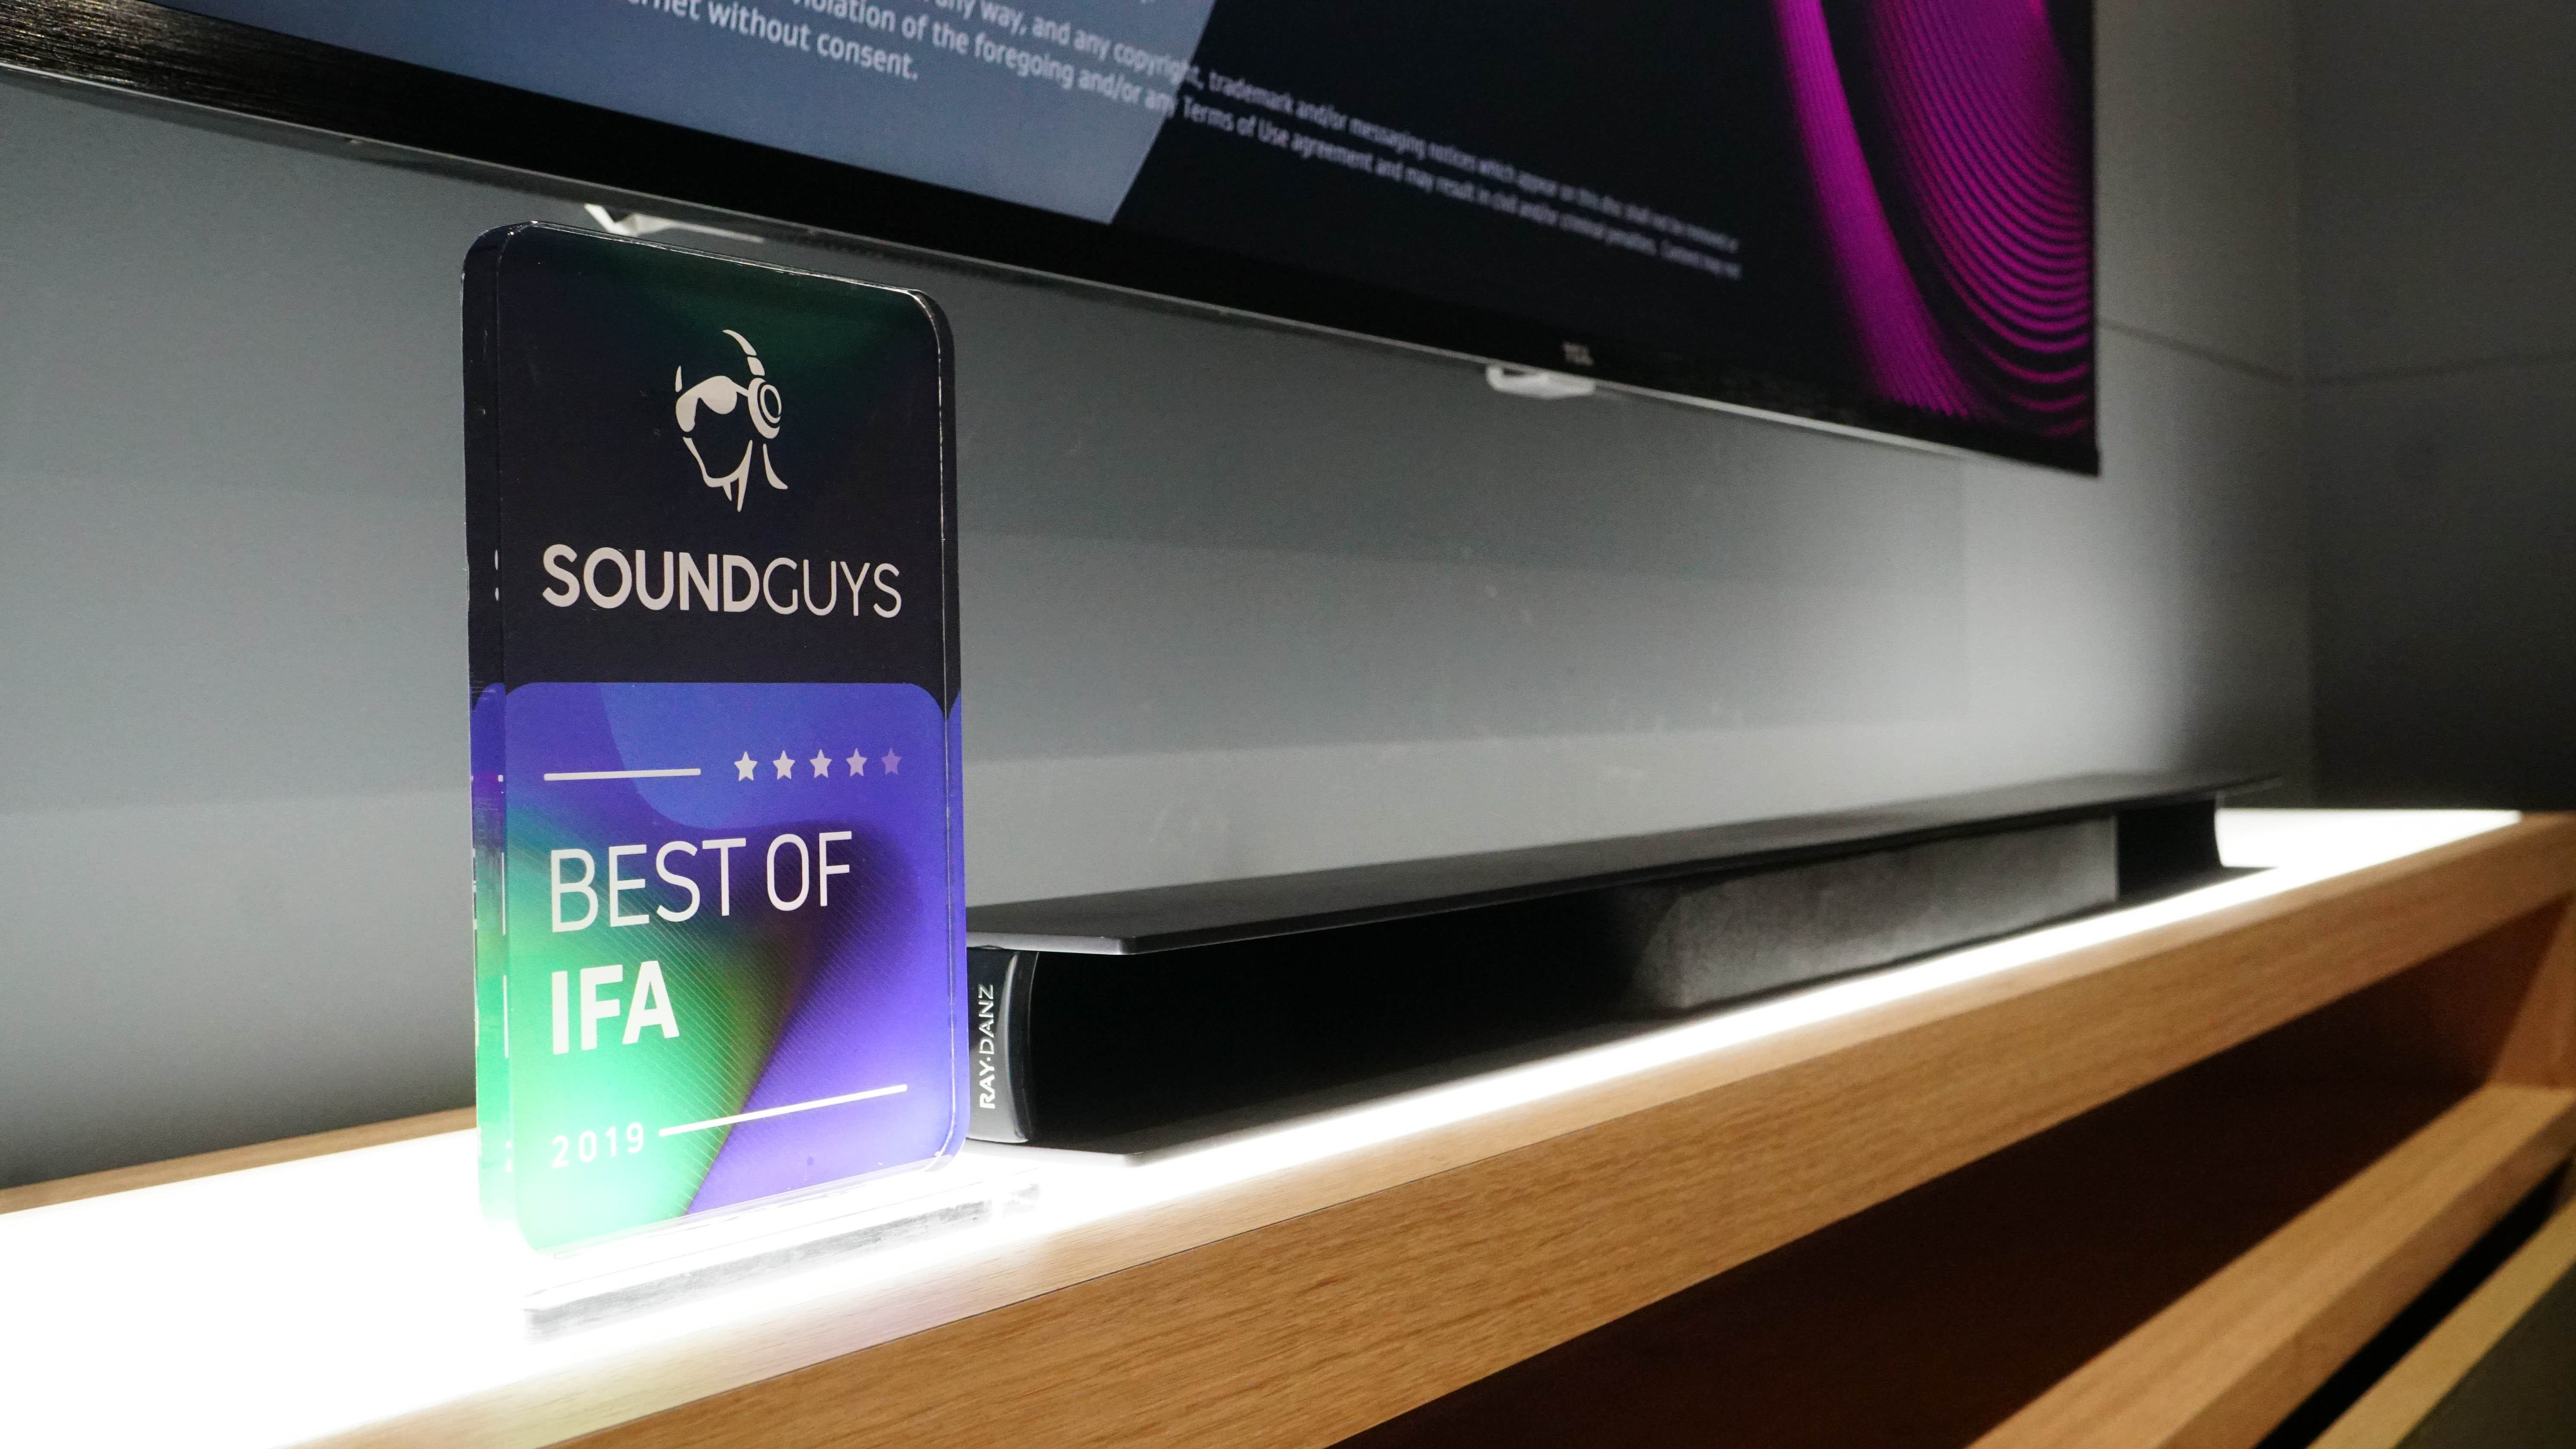 A photo of the SoundGuys best of IFA award next to the TCL RAY-DANZ soundbar.